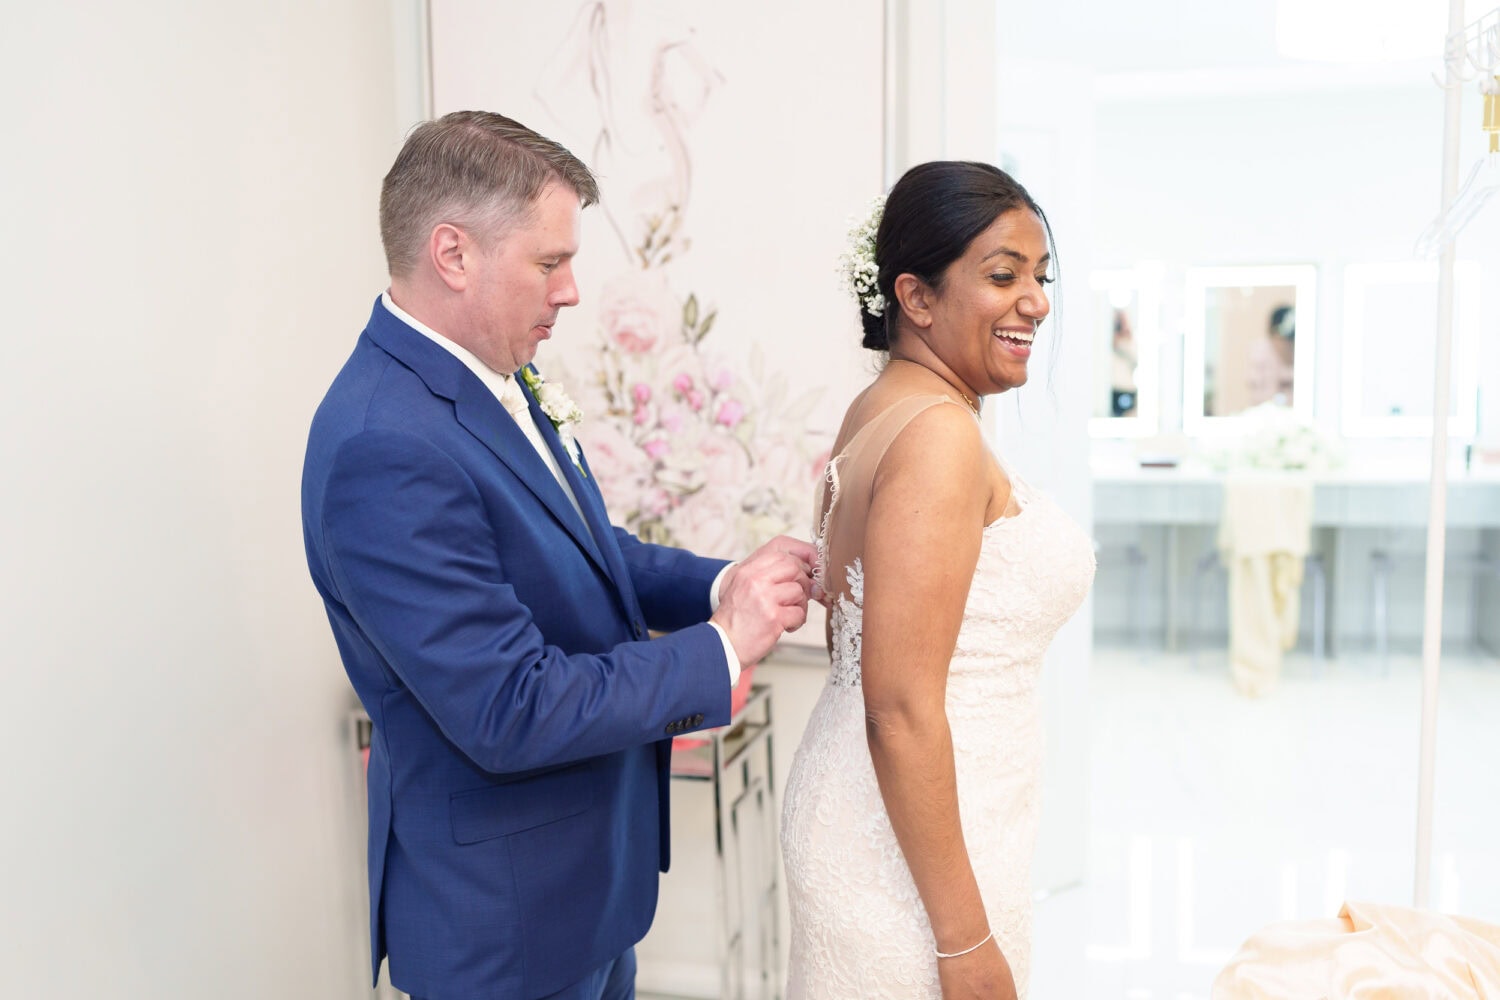 Groom trying to help bride with her white wedding dress - 21 Main Events